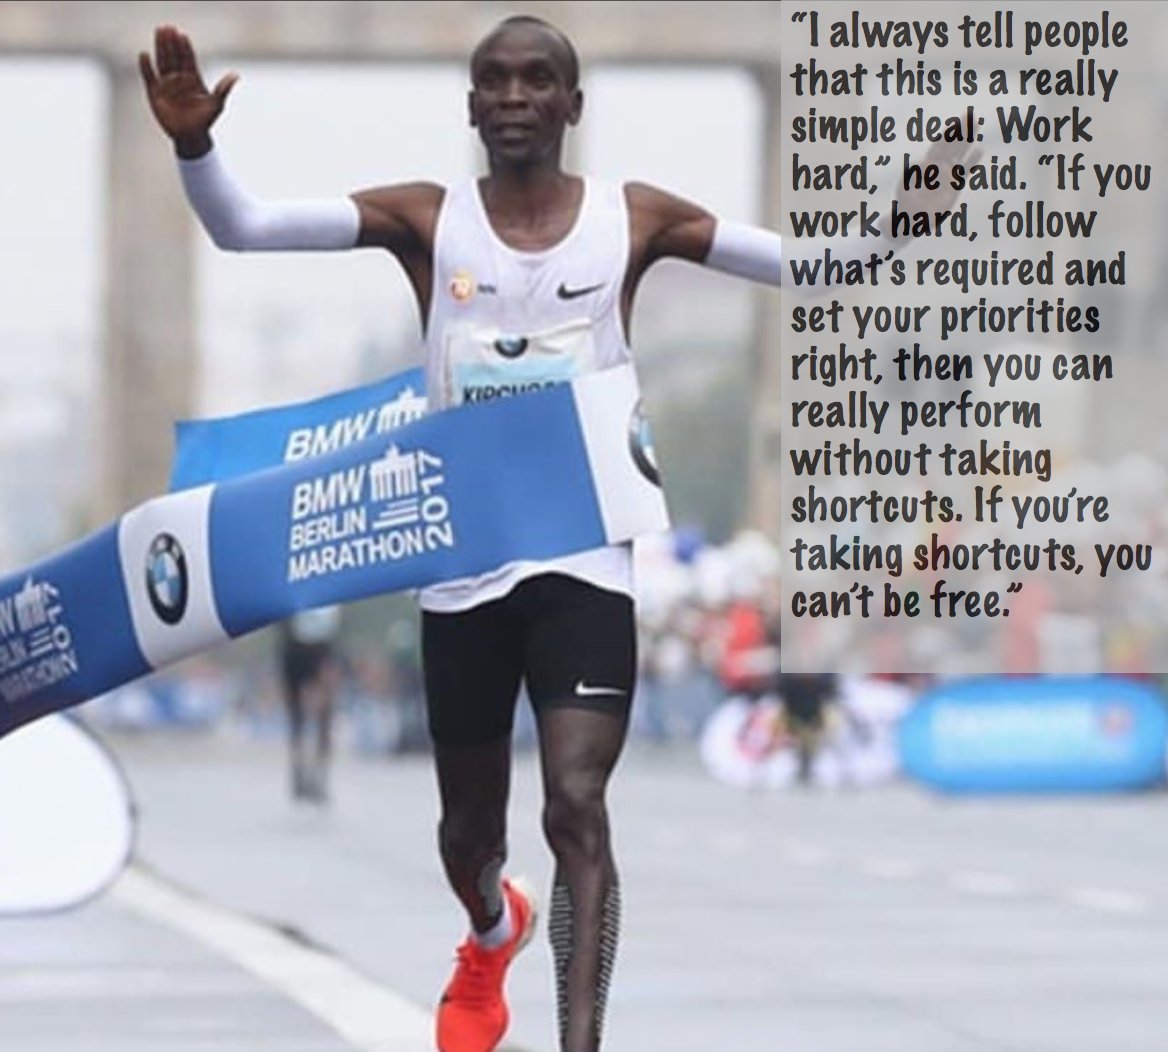 David Ndii Auf Twitter Memo To Kenyans Att Election Thieves Tenderpreneurs Exam Cheats Hustlers Etc As We Congratulate Eliudkipchoge For His Peerless Berlinmarathon2018 Performance If You Are Are Taking Shortcuts You